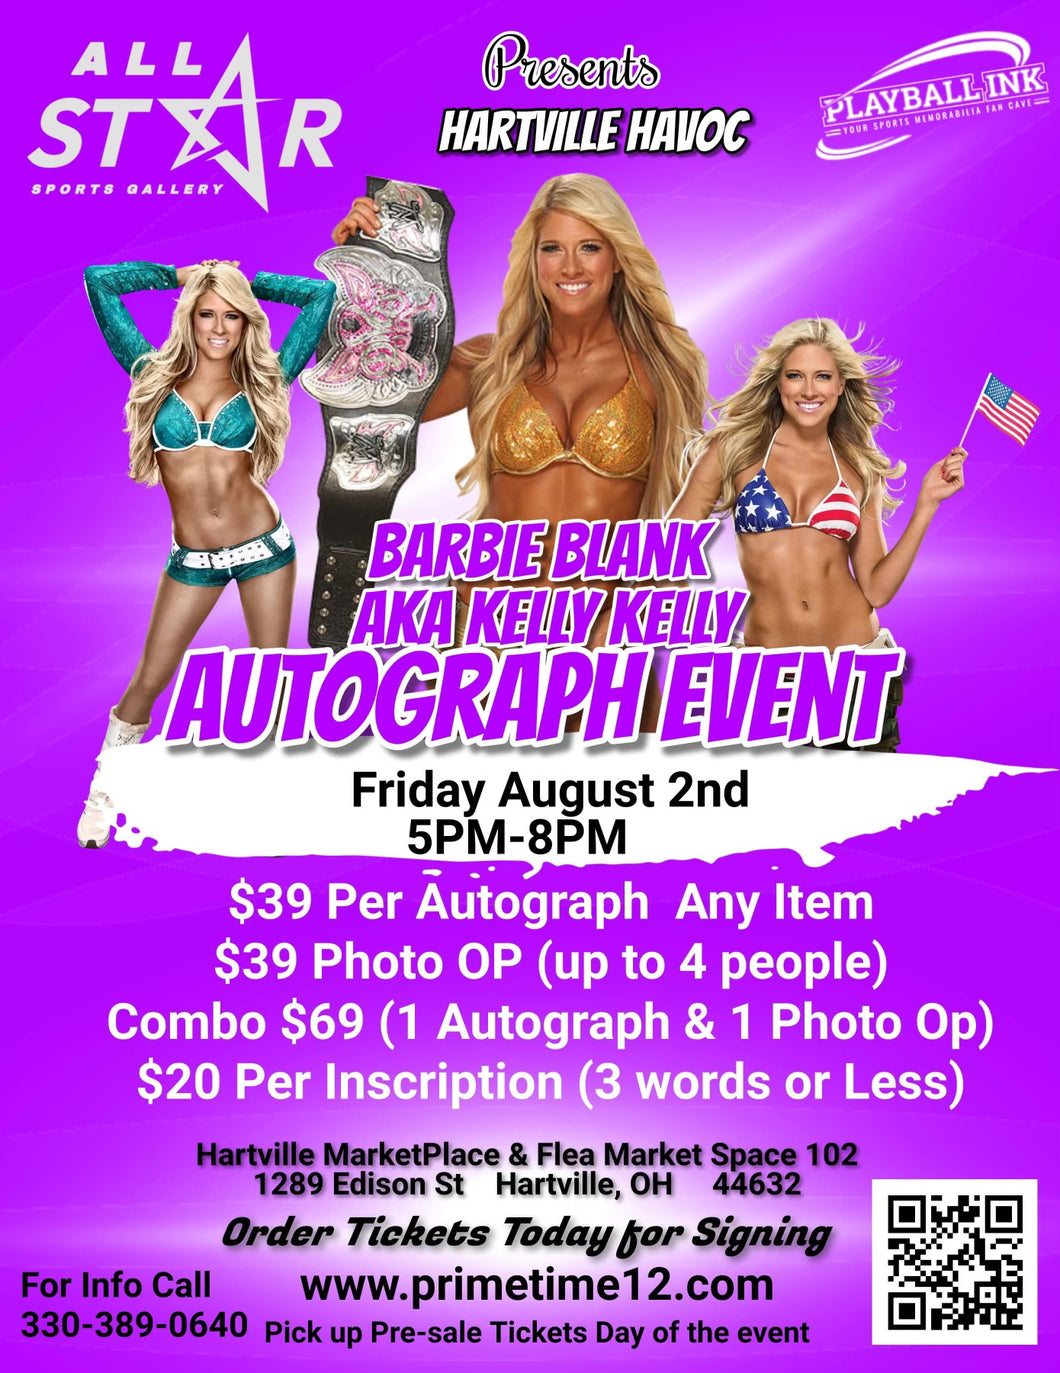 Barbie Blank AKA KELLY KELLY Pre-Sale ticket for autograph signing add on Inscription THIS IS NOT FOR AN AUTOGRAPH THIS IS TO HAVE HER ADD SOMETHING EXTRA TO YOUR AUTOGRAPH (3 Words Max)